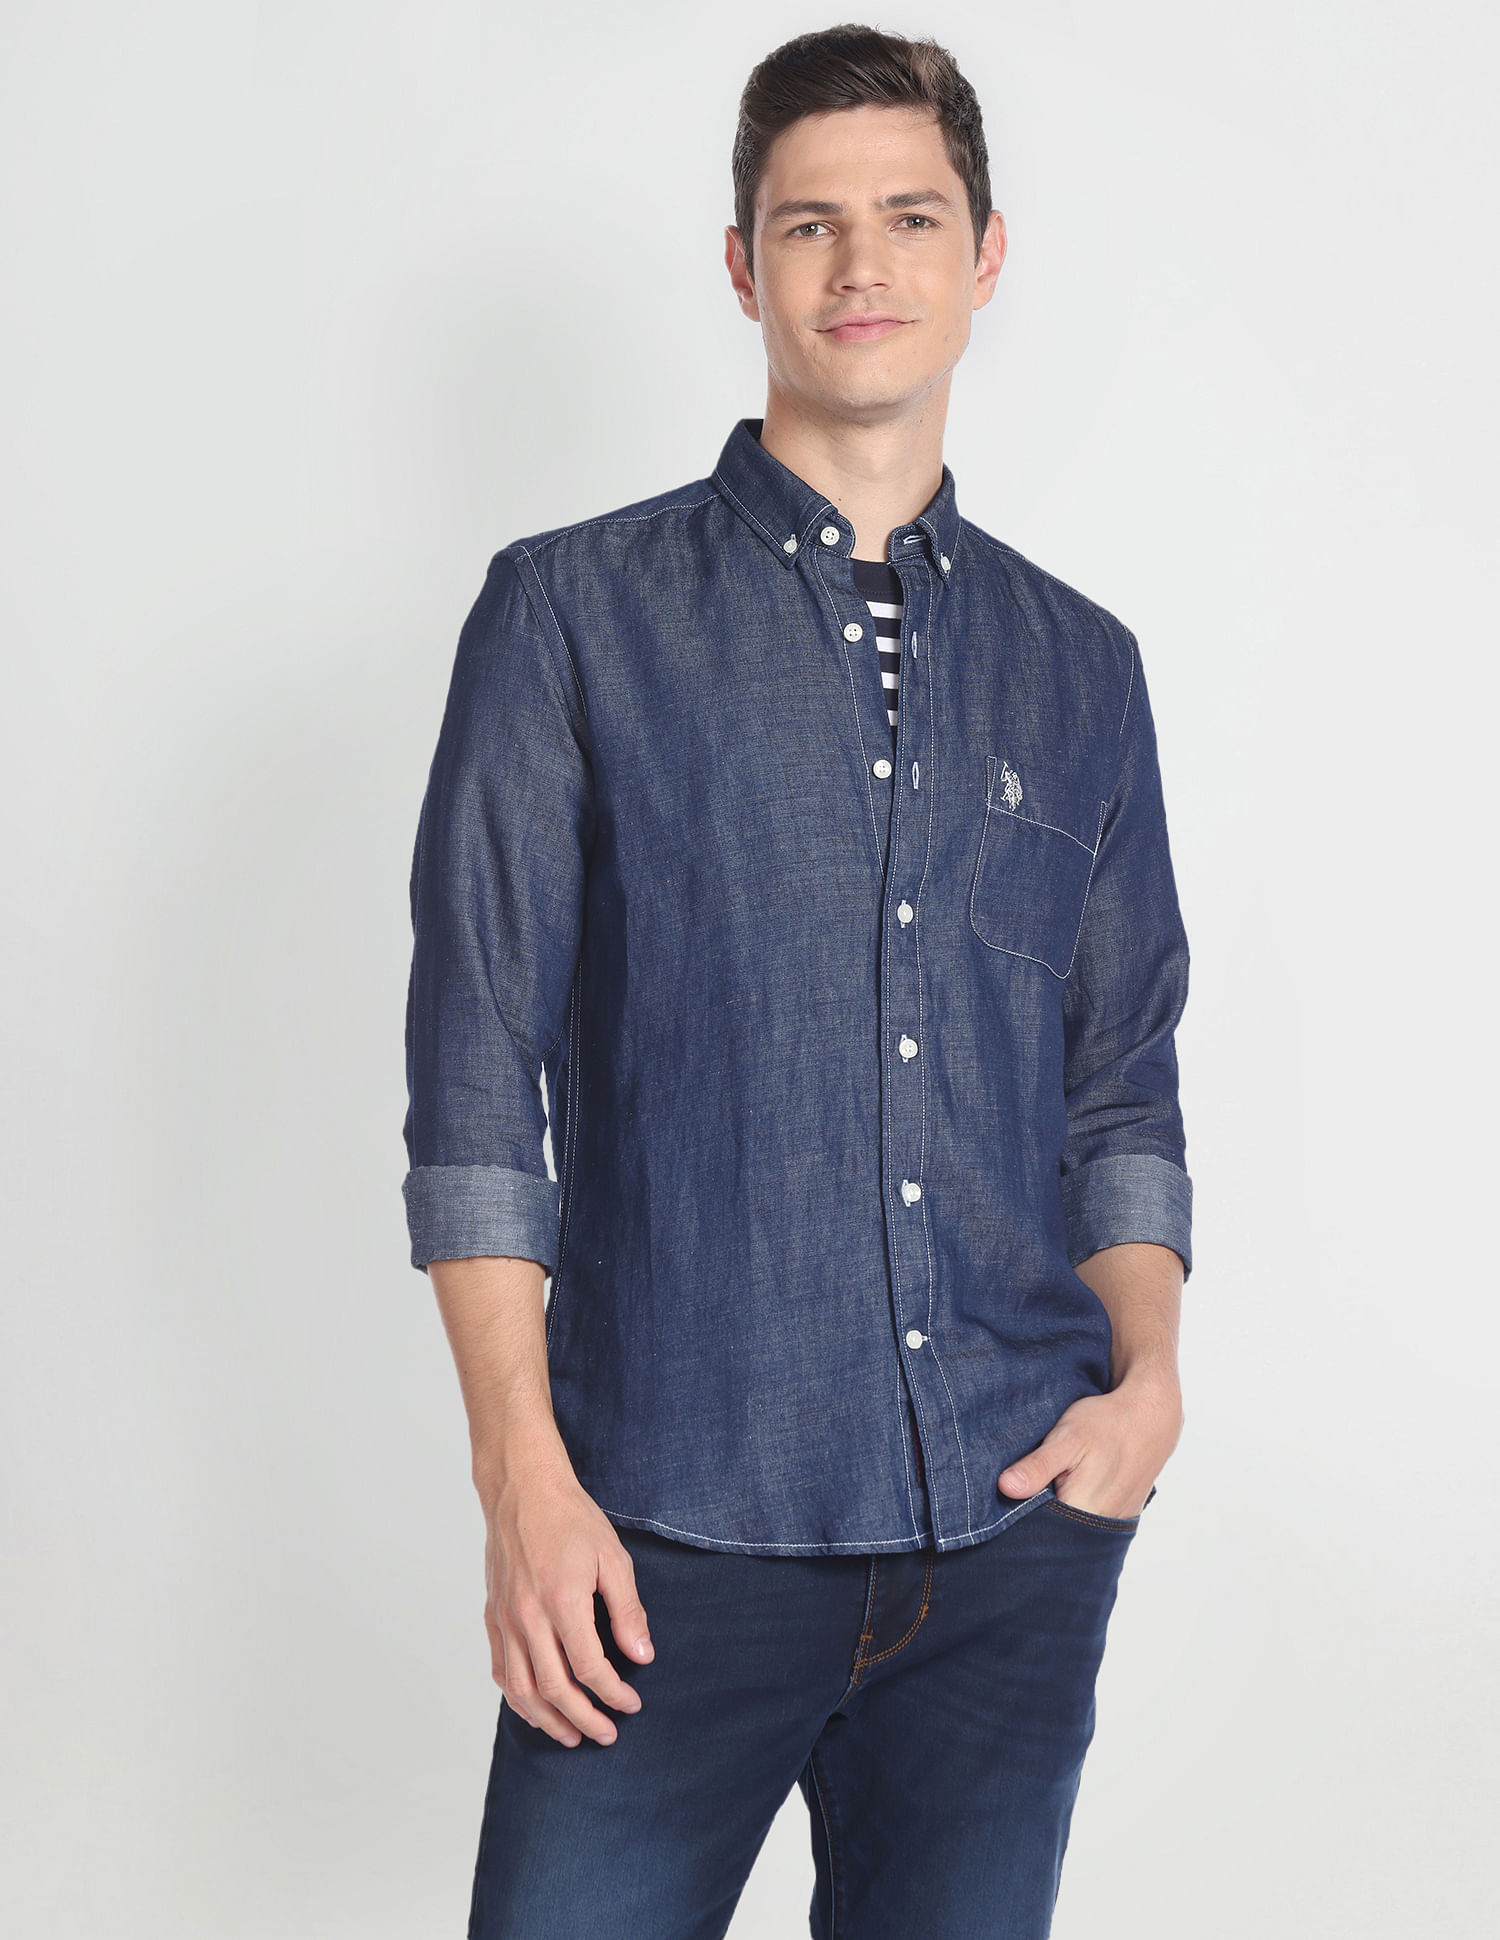 Pepe Jeans Men Solid Casual Light Blue Shirt - Buy Pepe Jeans Men Solid  Casual Light Blue Shirt Online at Best Prices in India | Flipkart.com